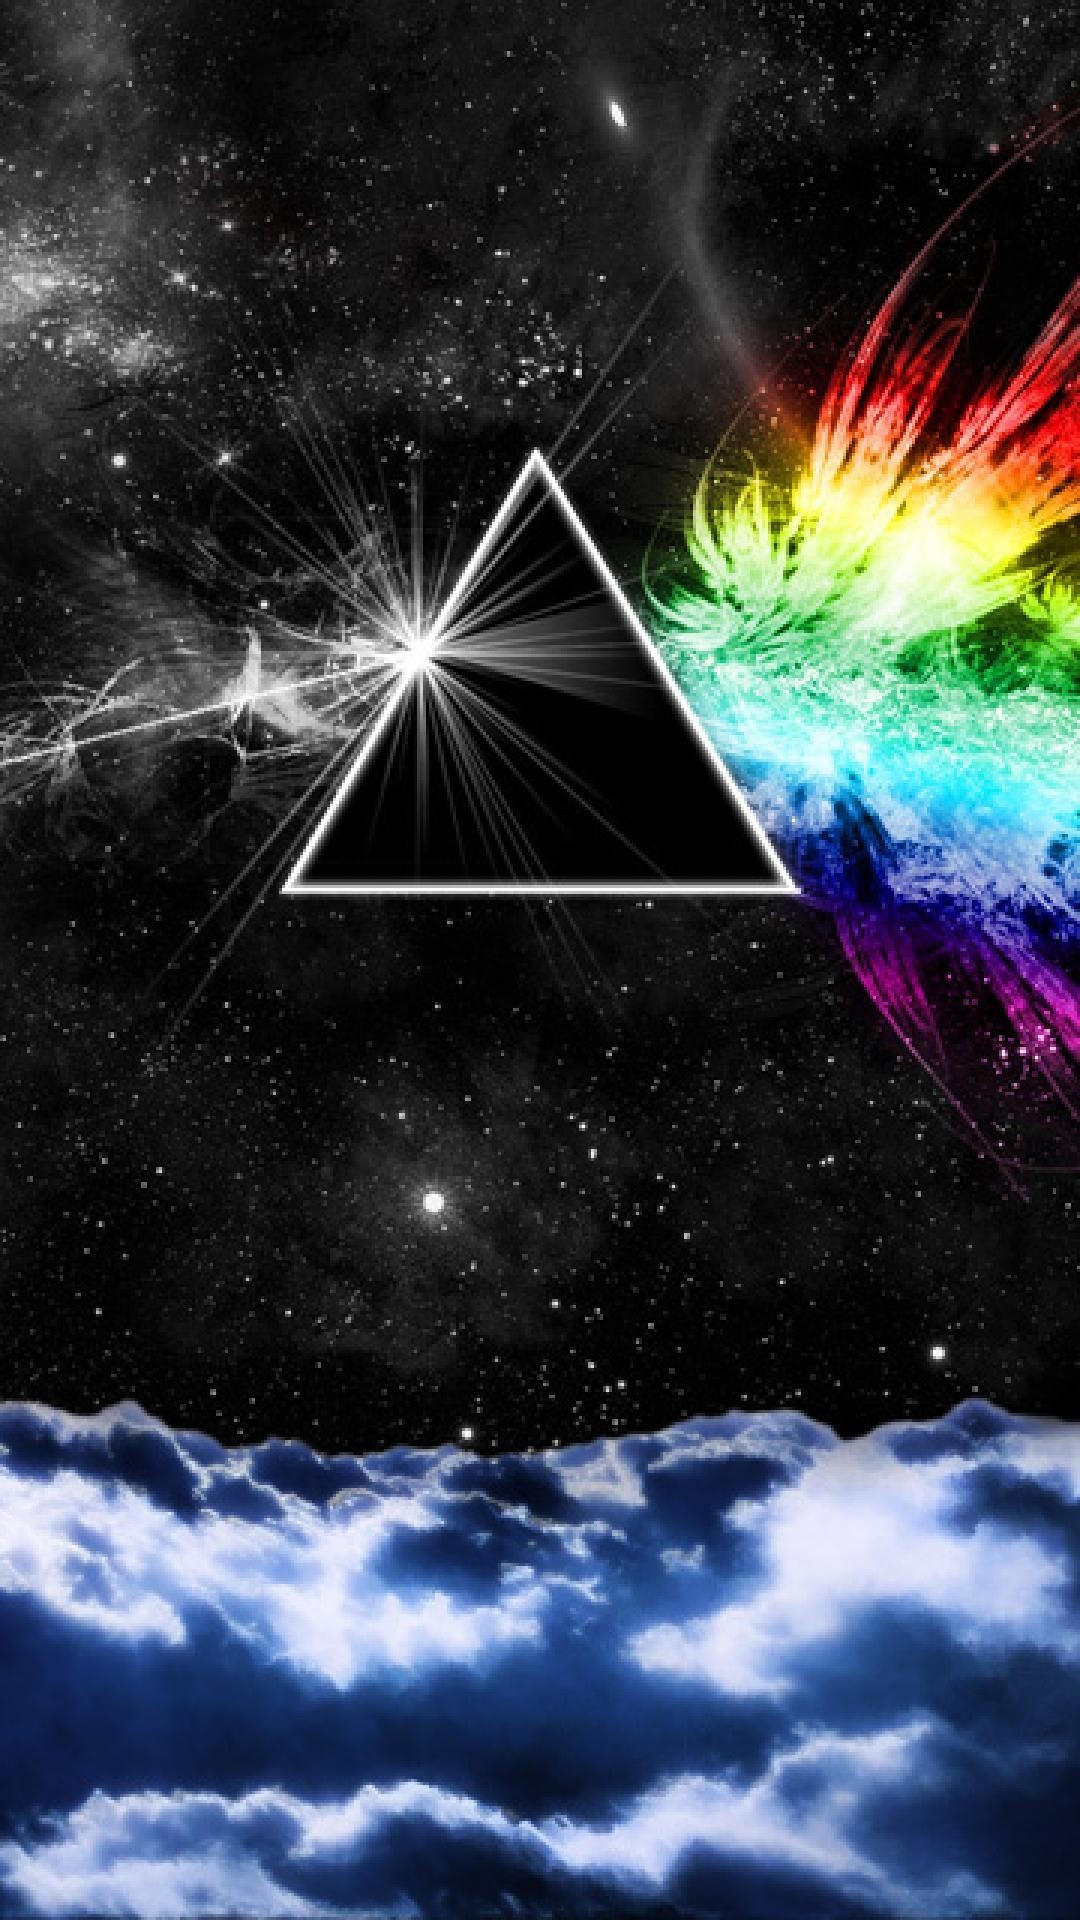 1080x1920 cool pink floyd iphone background. Iphone 6 WallpaperIphone ...